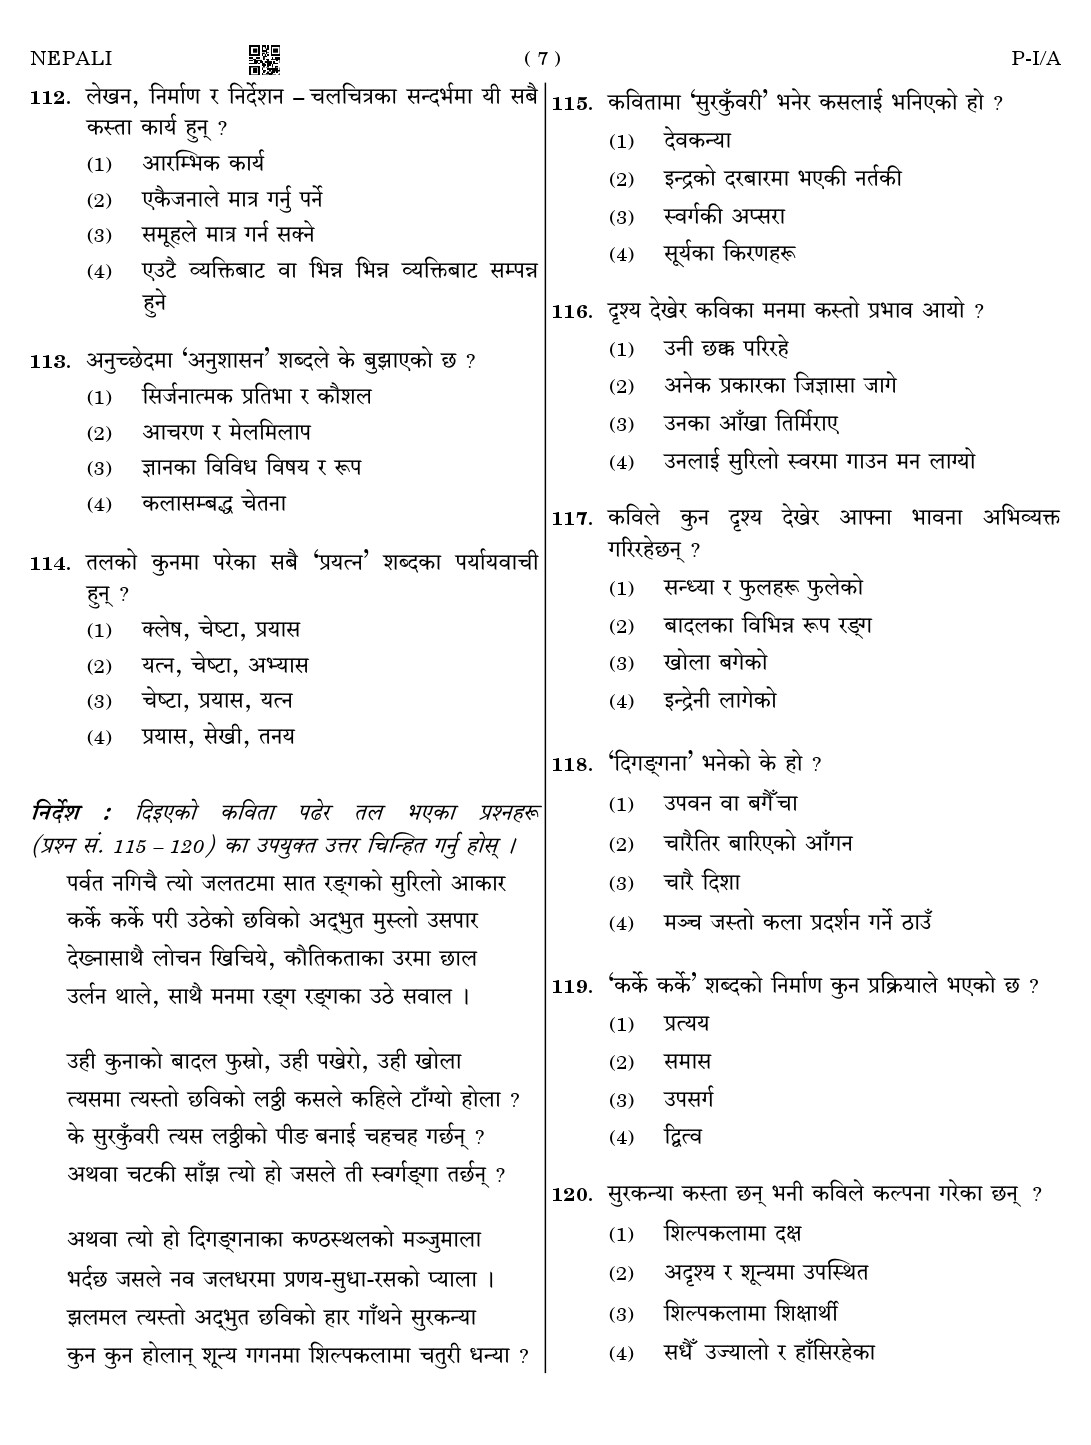 CTET August 2023 Nepali Paper 1 Part IV and V 7